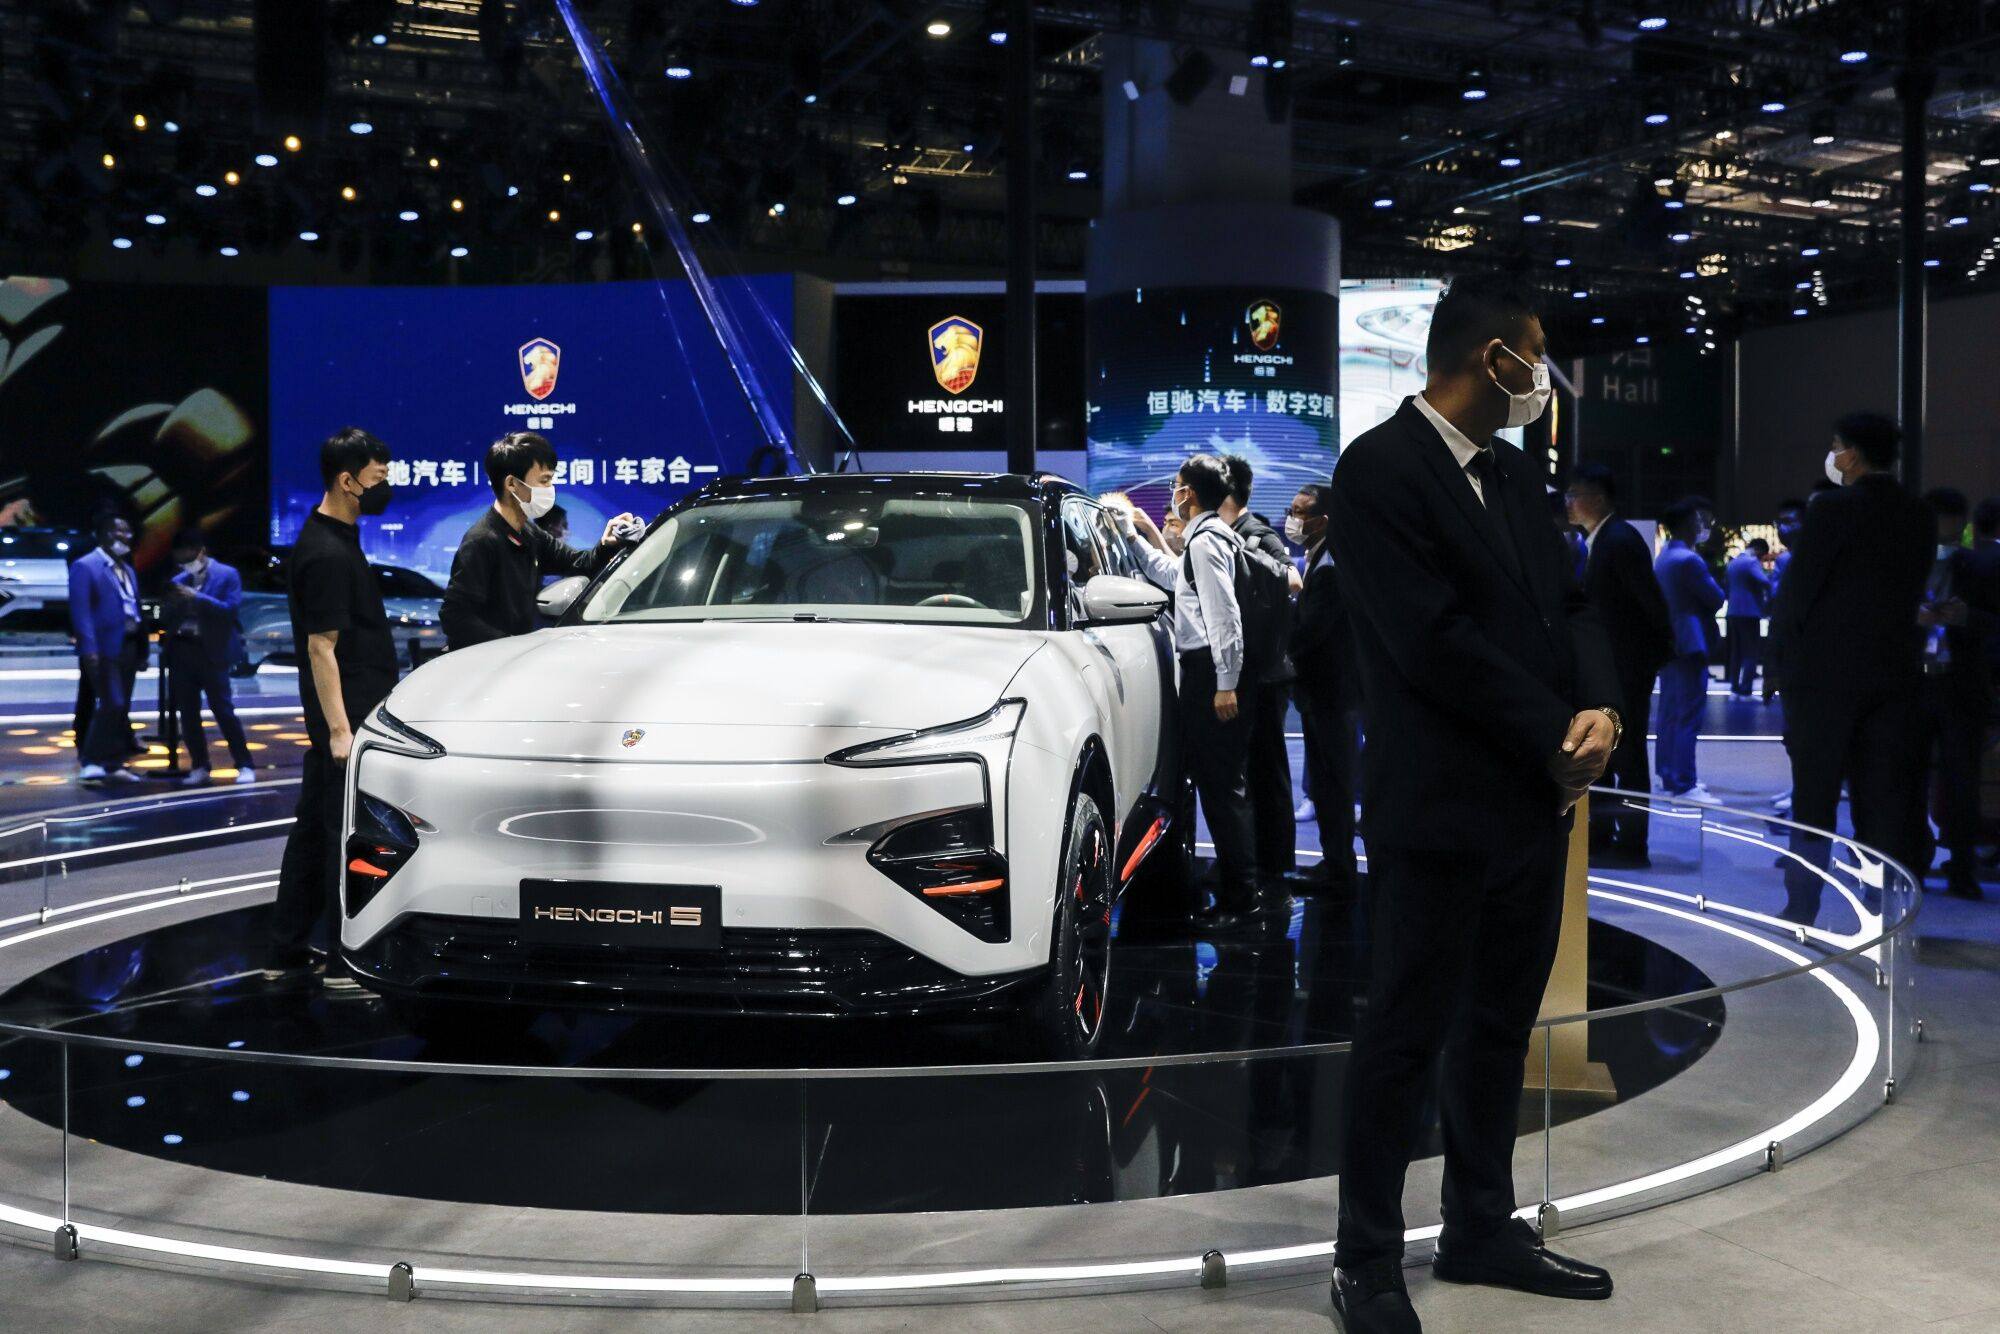 Evergrande NEV’s Hengchi 5 electric vehicle is displayed at the Shanghai car show in April 2021. Photo: Bloomberg